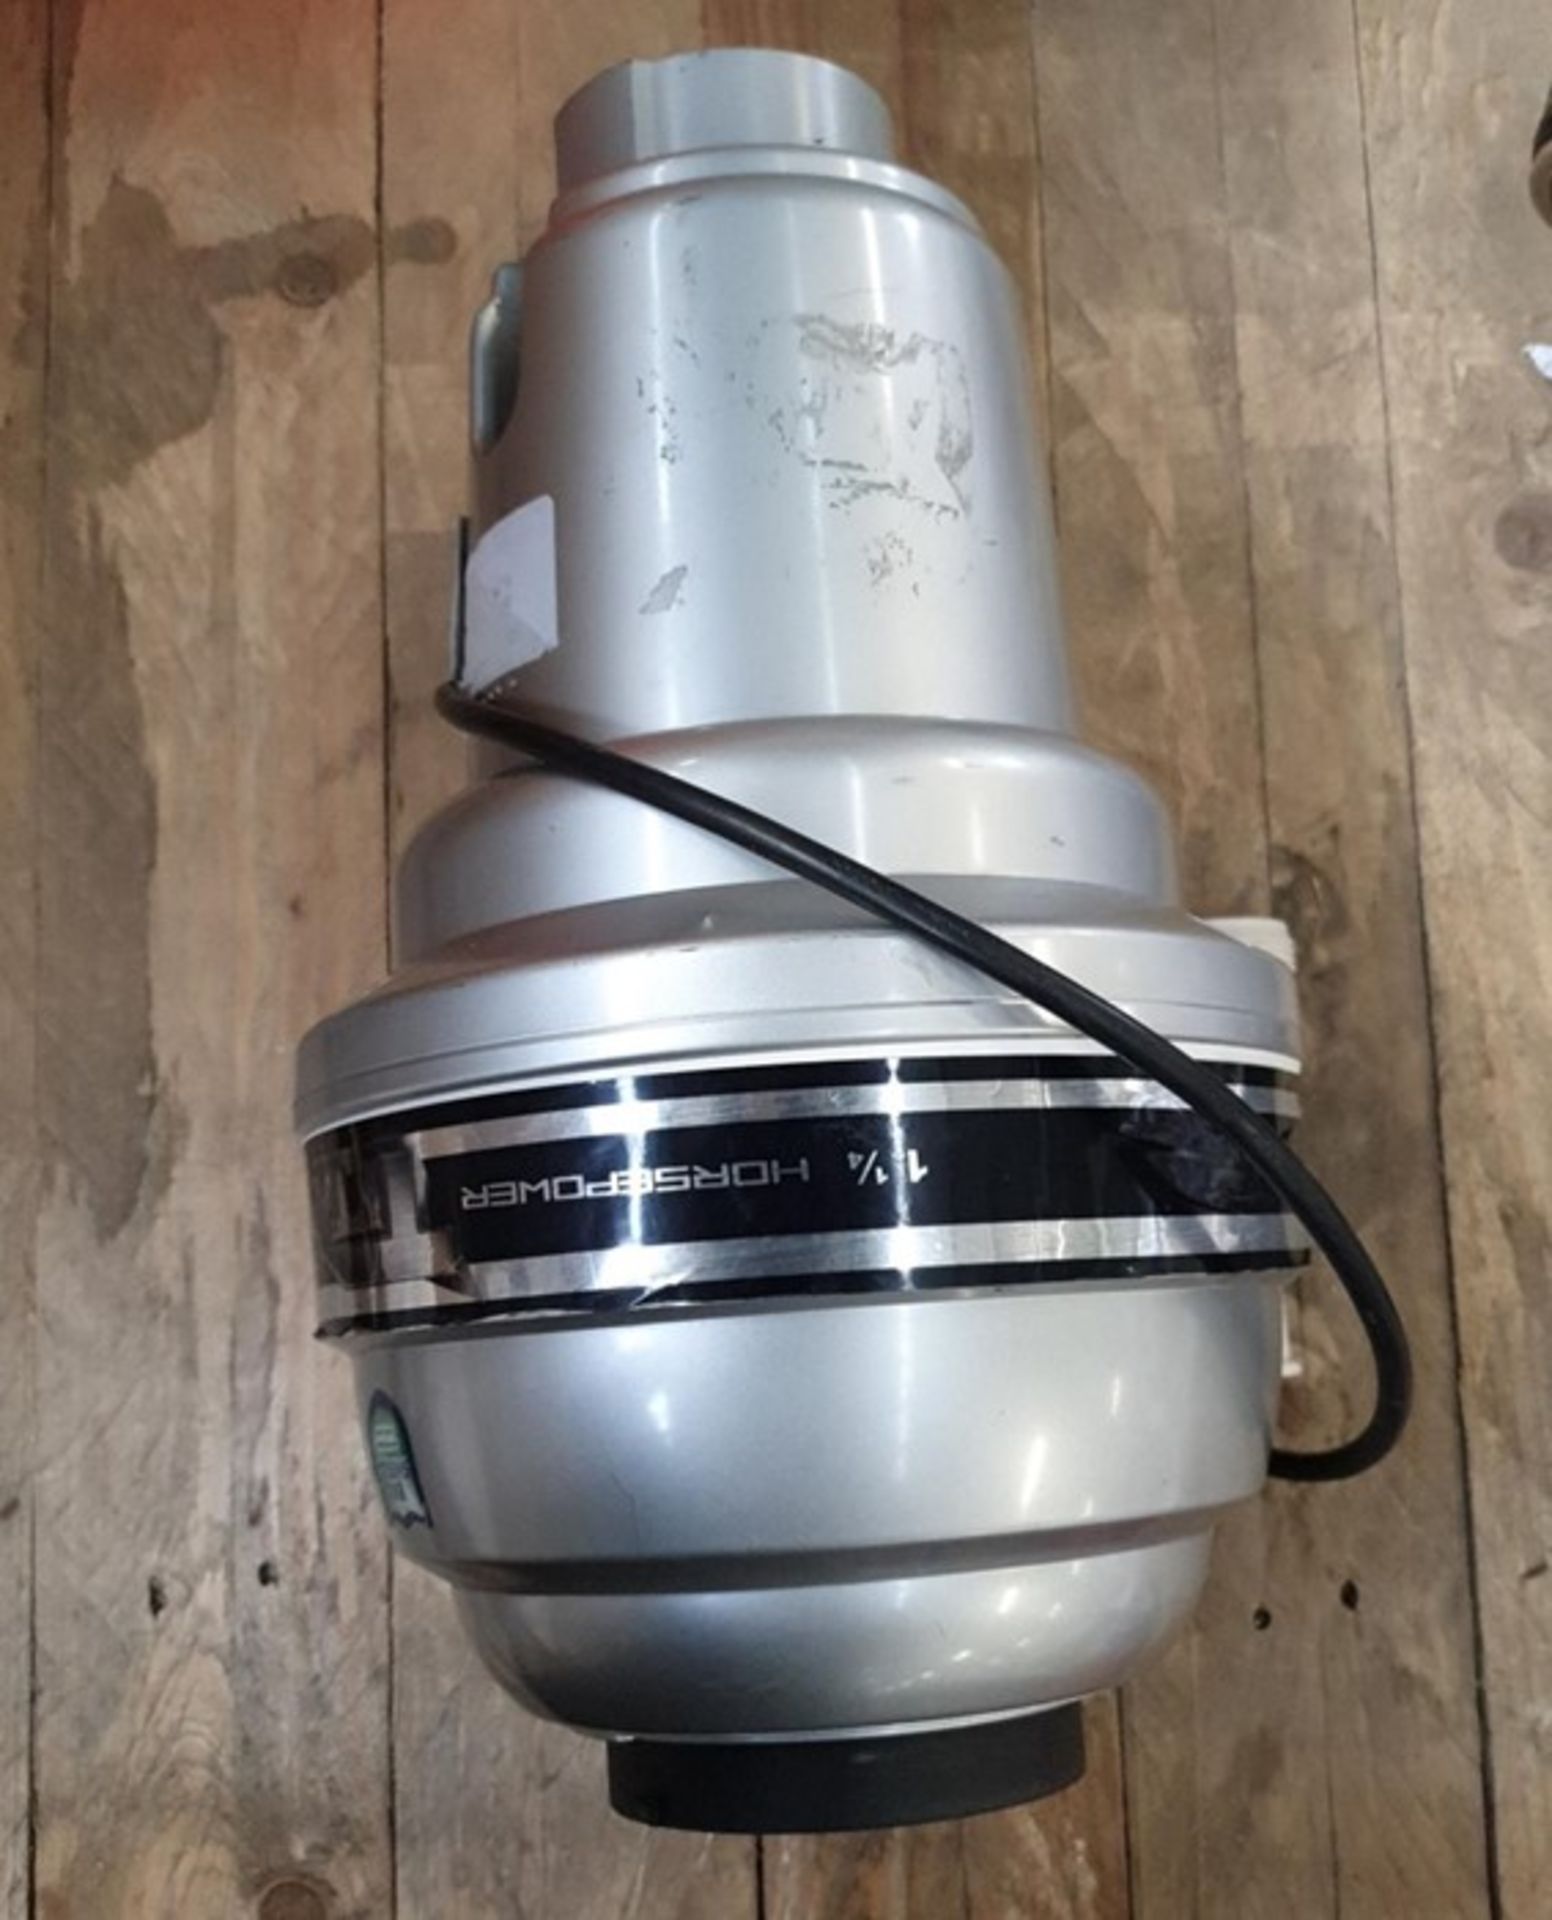 1 UNBOXED TITAN FOOD WASTE DISPOSER - T1060 - SILVER / RRP £109.00 (VIEWING HIGHLY RECOMMENDED)